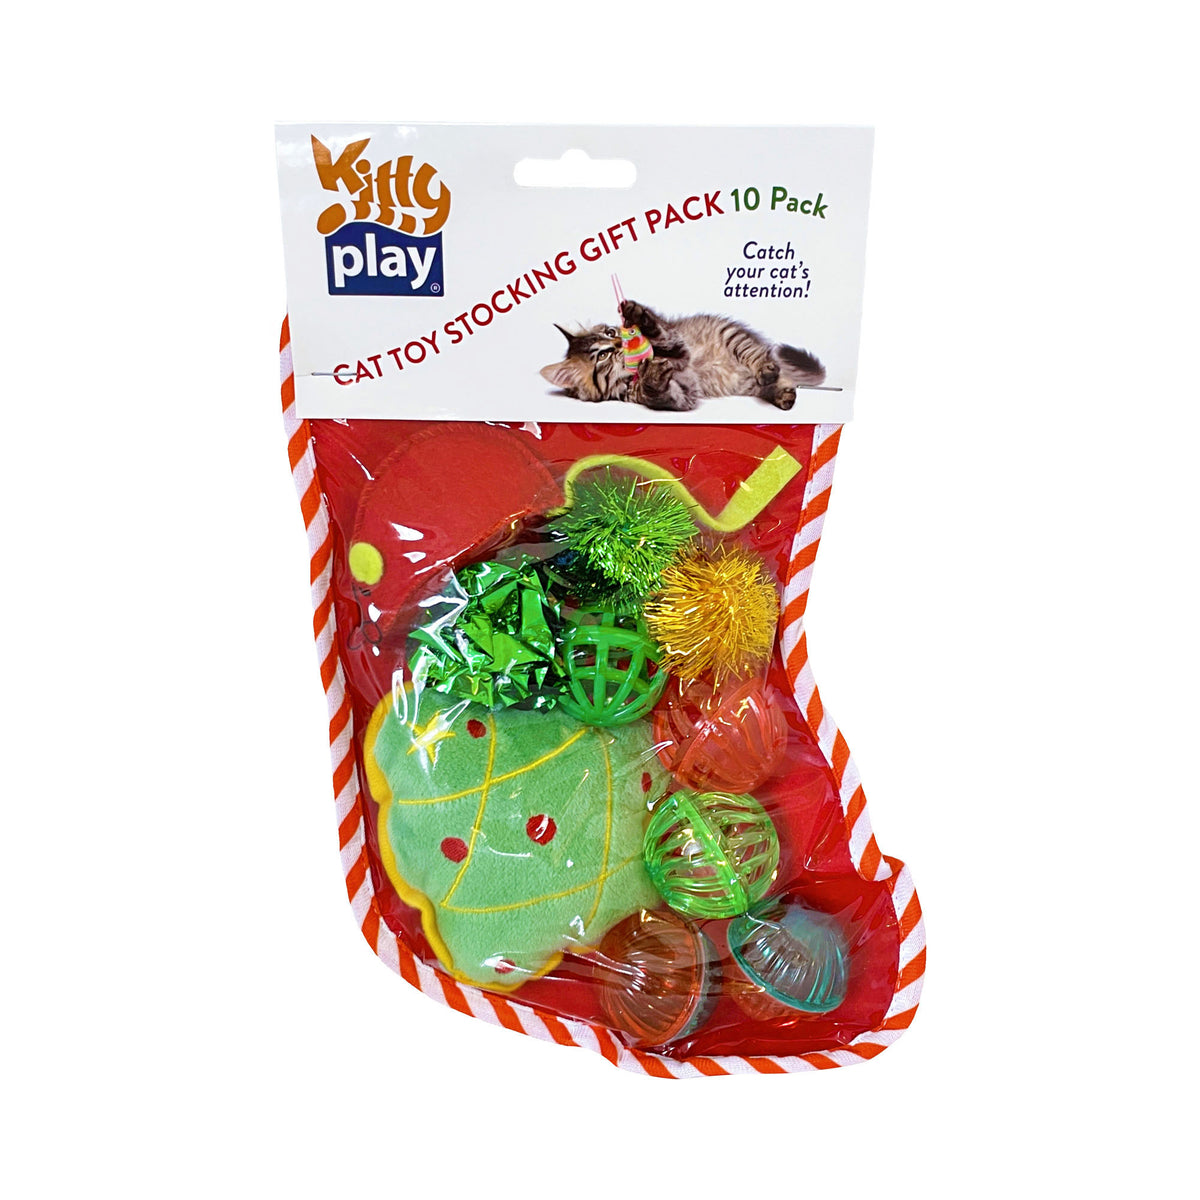 Kitty Play Christmas Cat Toy Stocking - 10 Pack